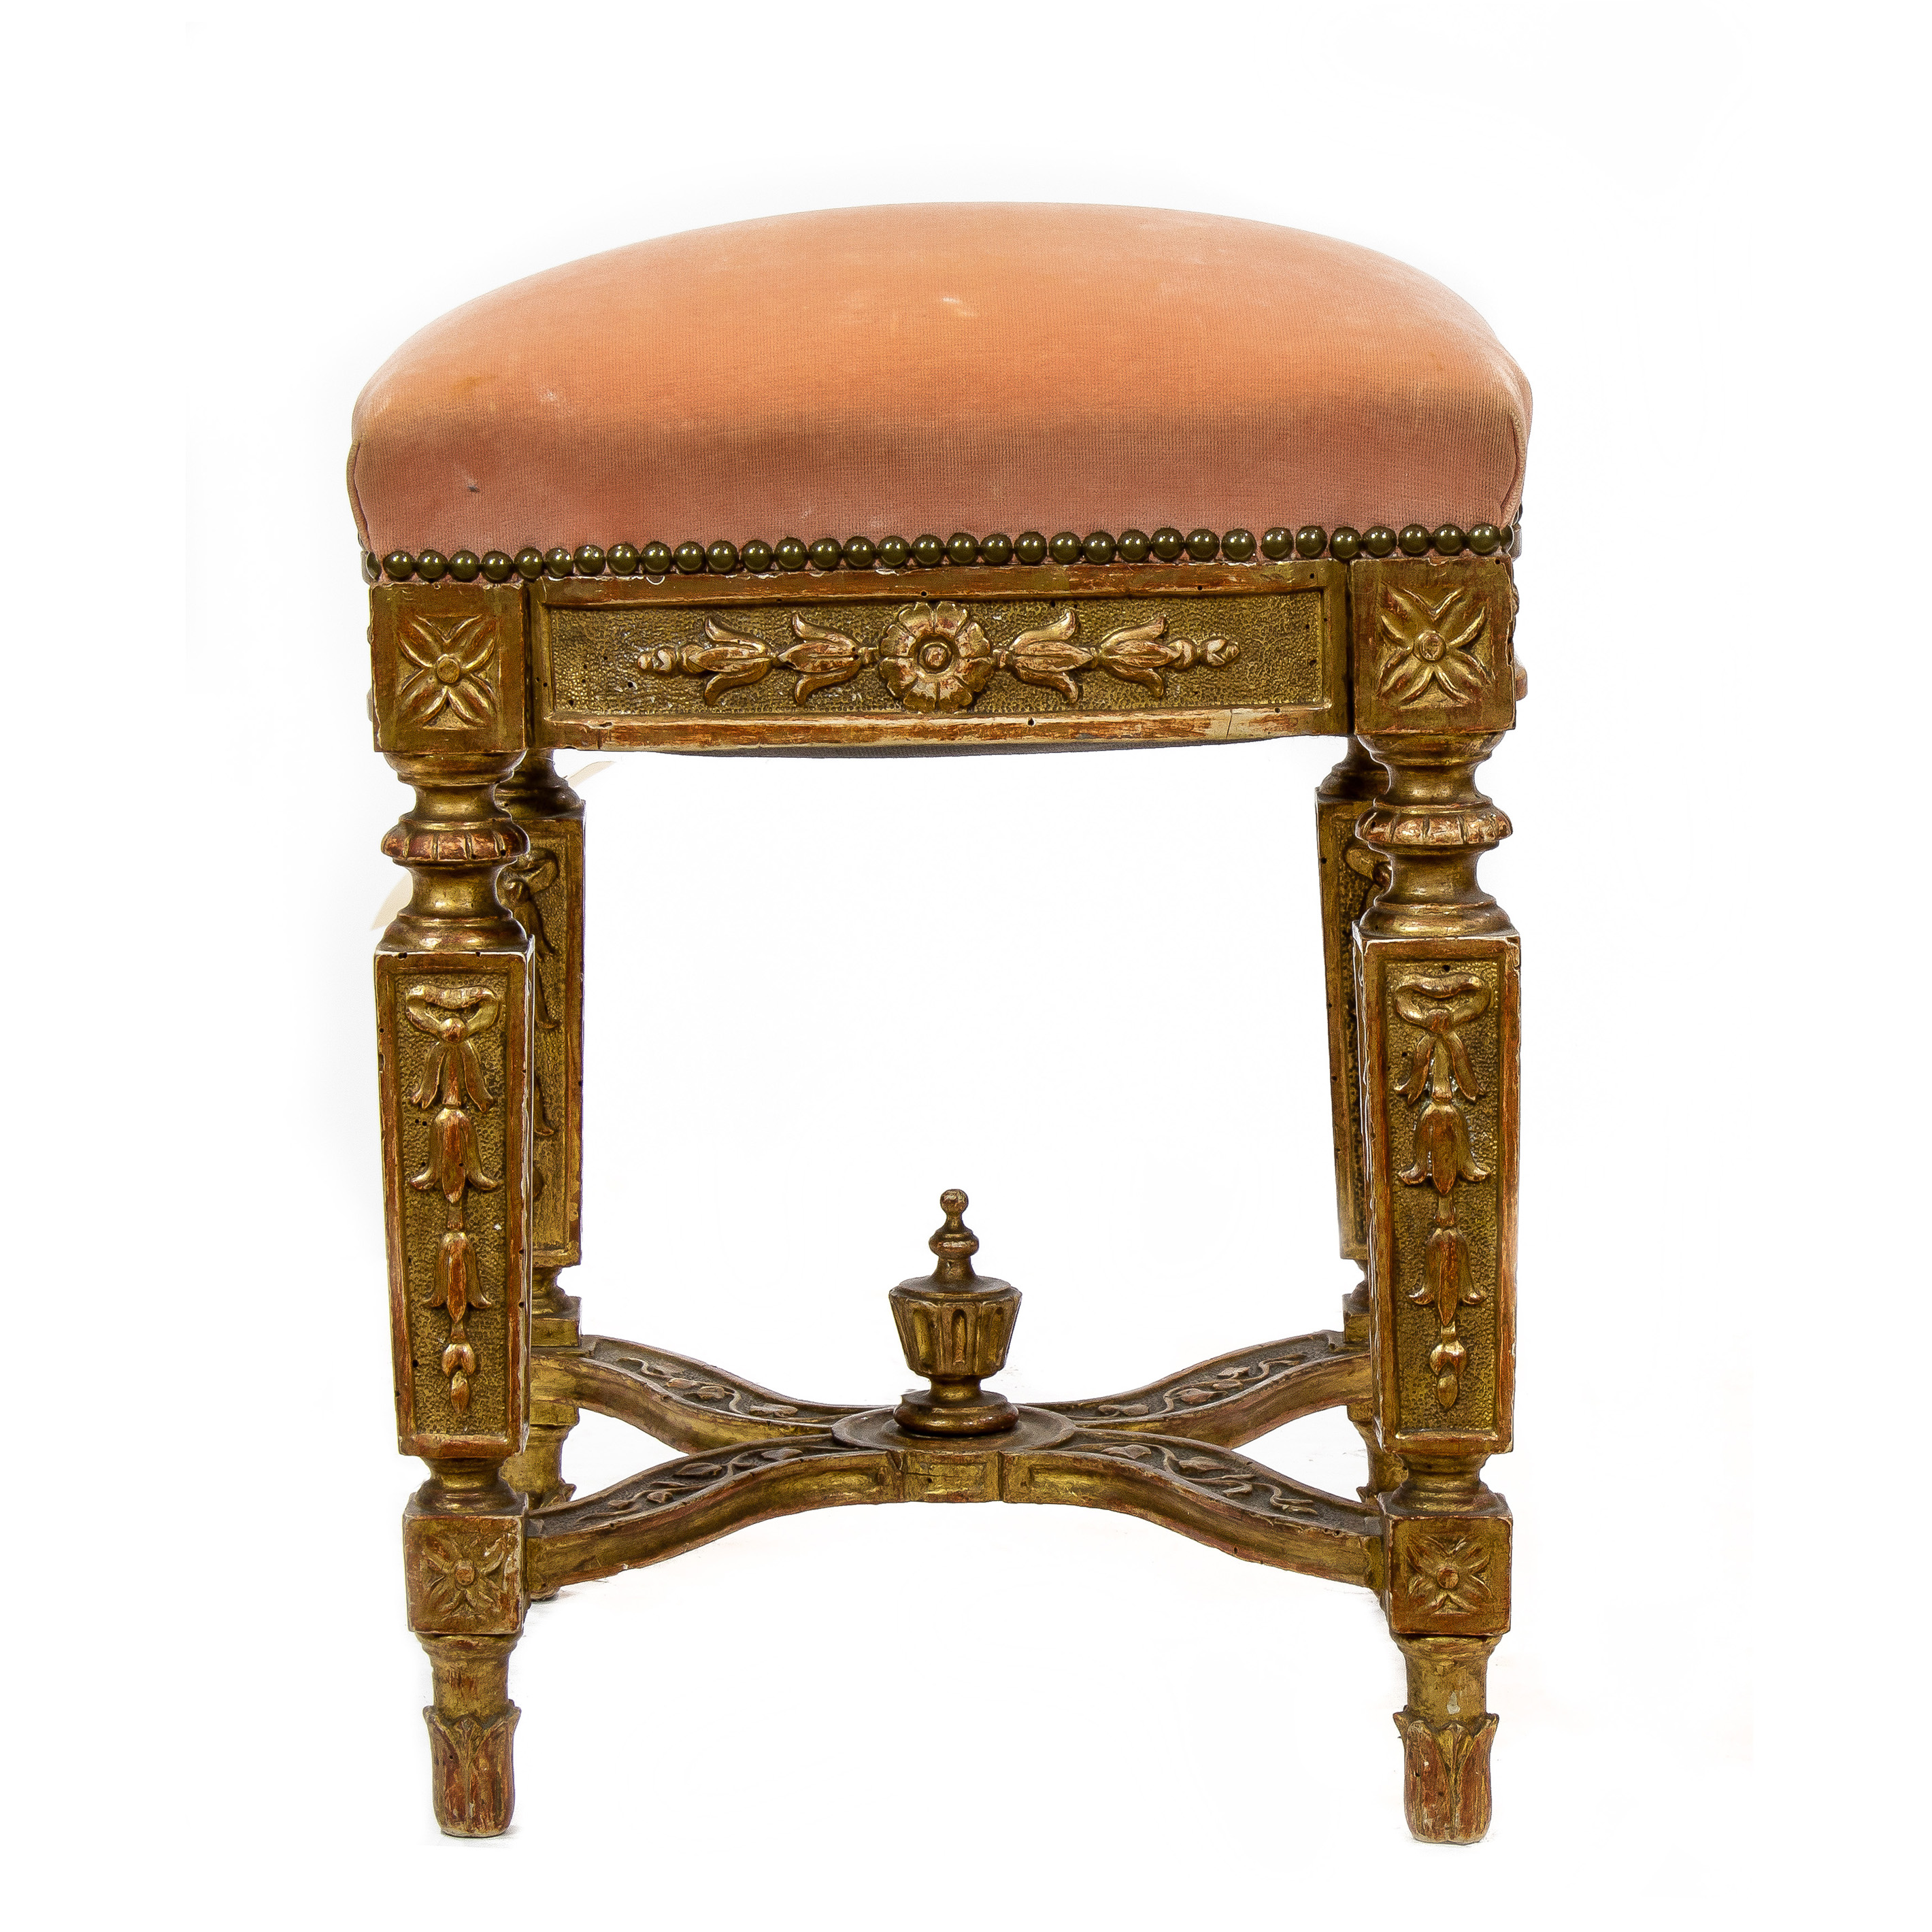 A CONTINENTAL GILTWOOD CARVED OTTOMAN 3a4292